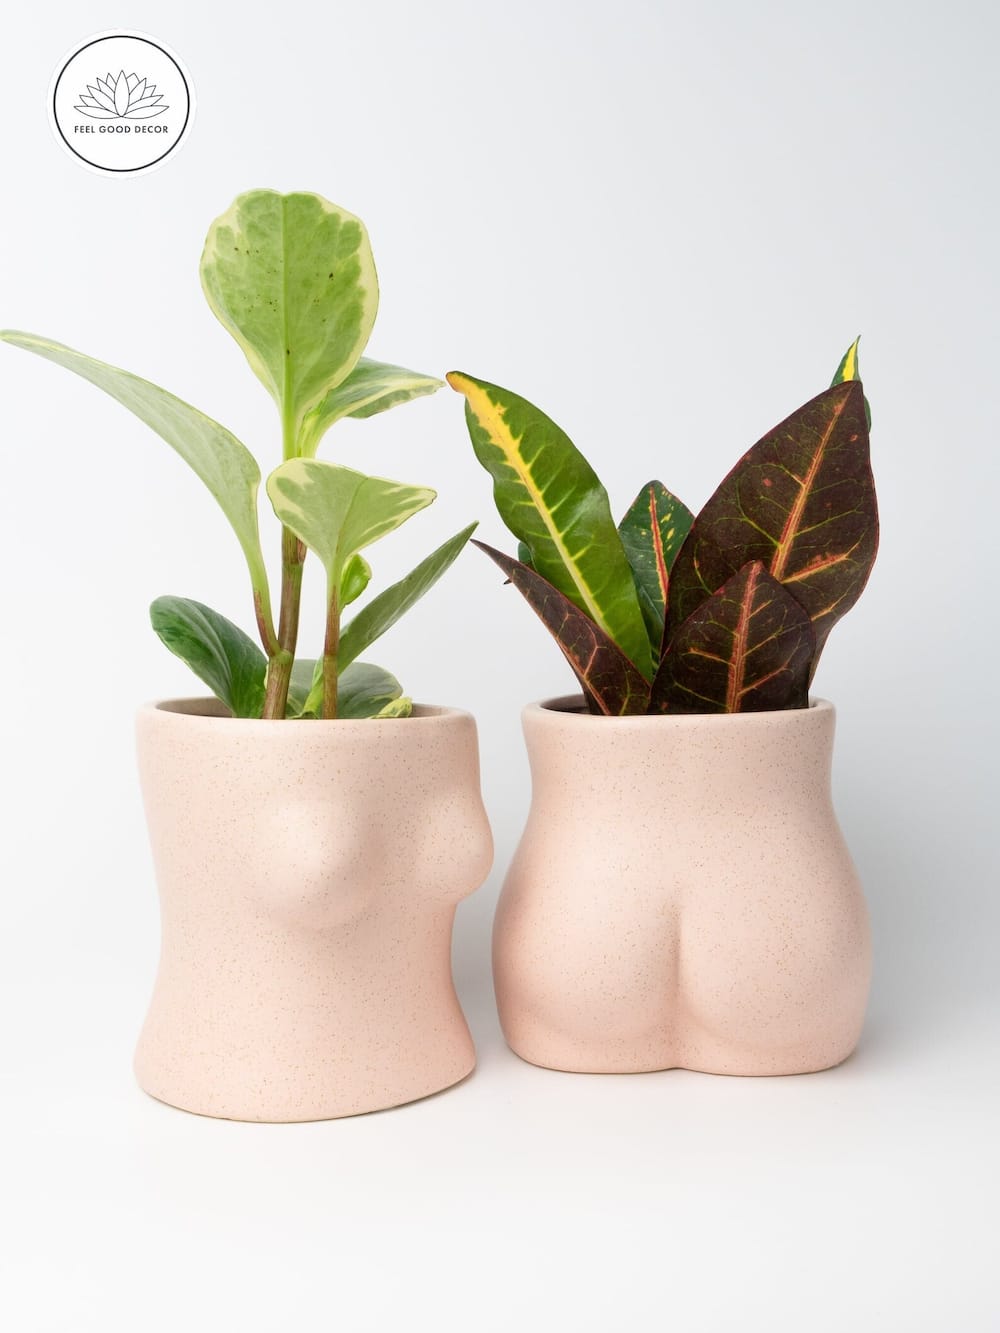 12 Best Boob Planters - Funny Breast Planters And Vases